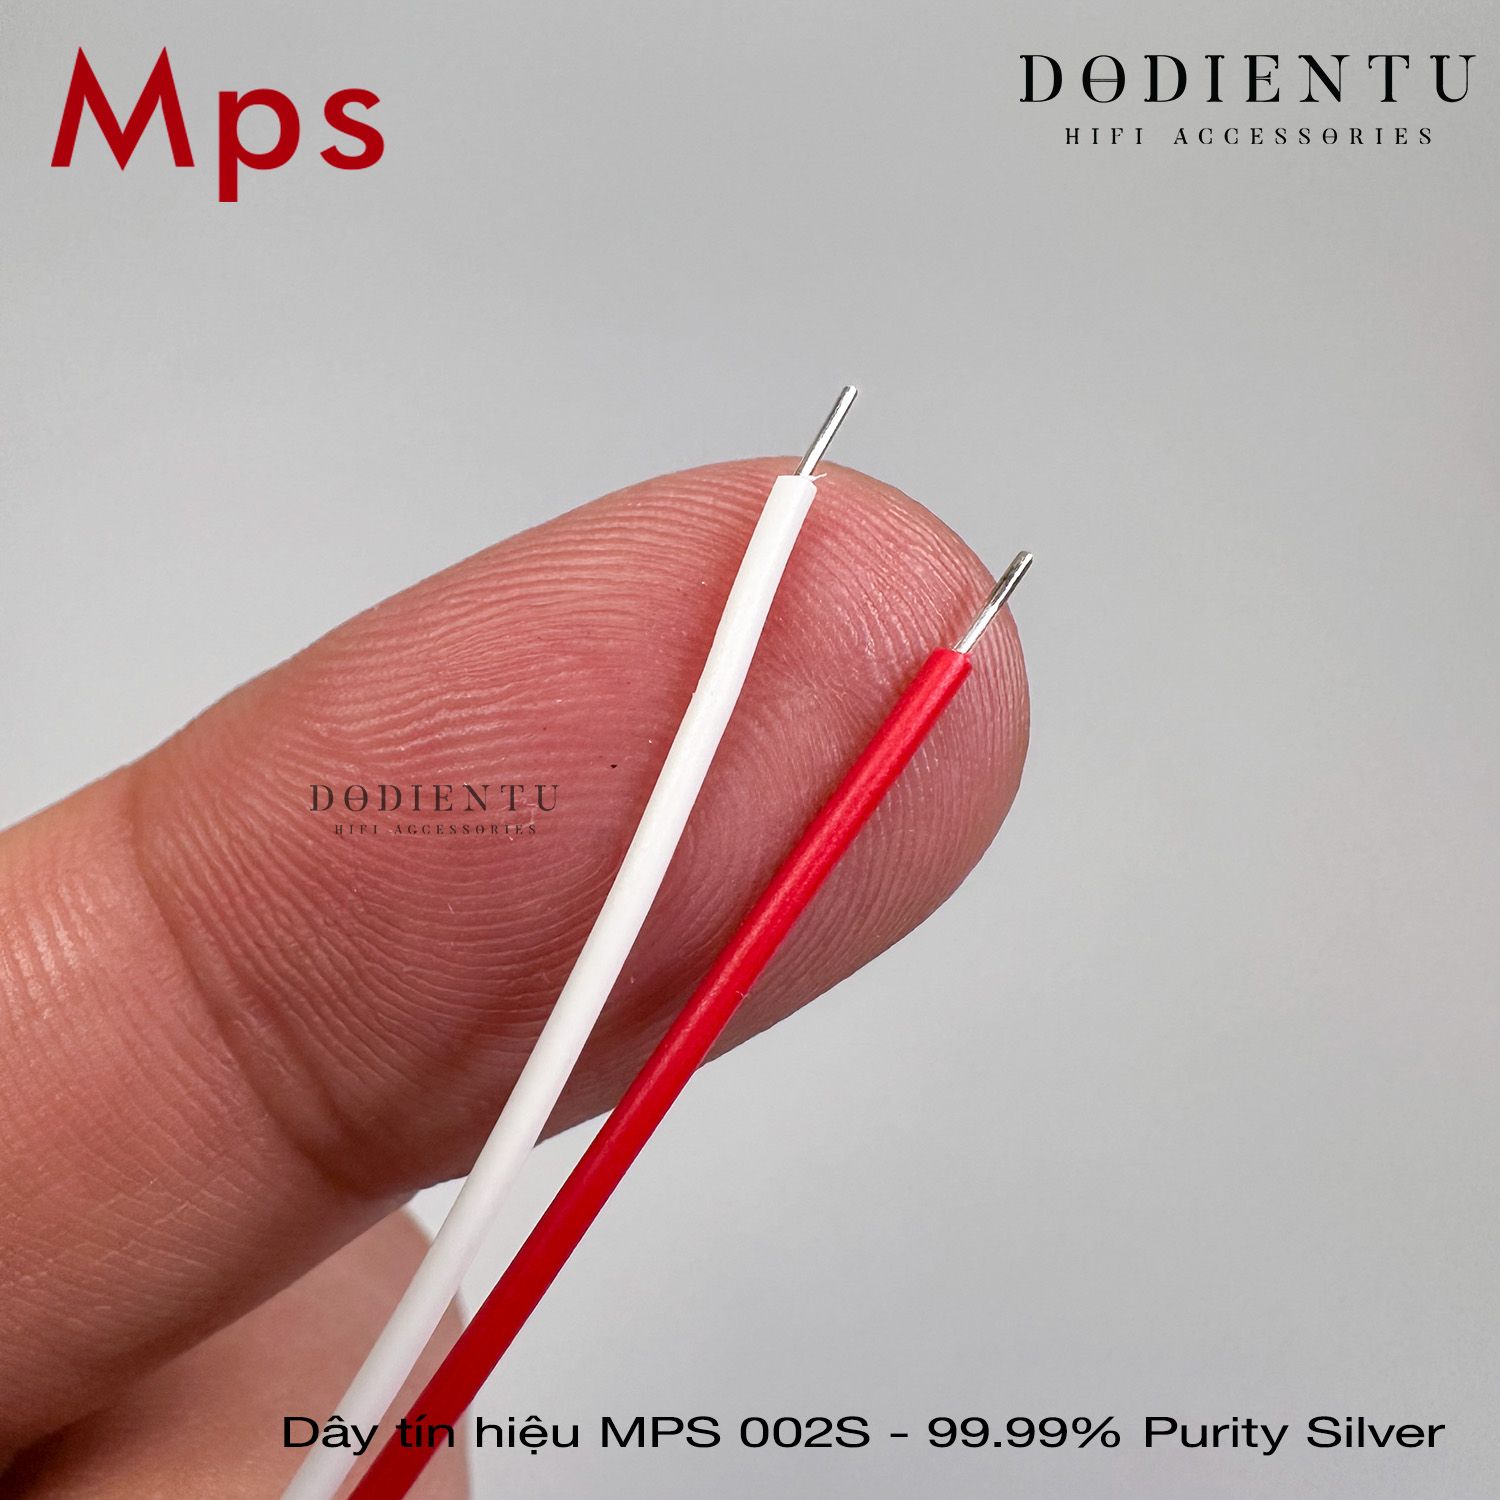 MPS 002S - 99.99% Purity Silver ( 24 AWG )